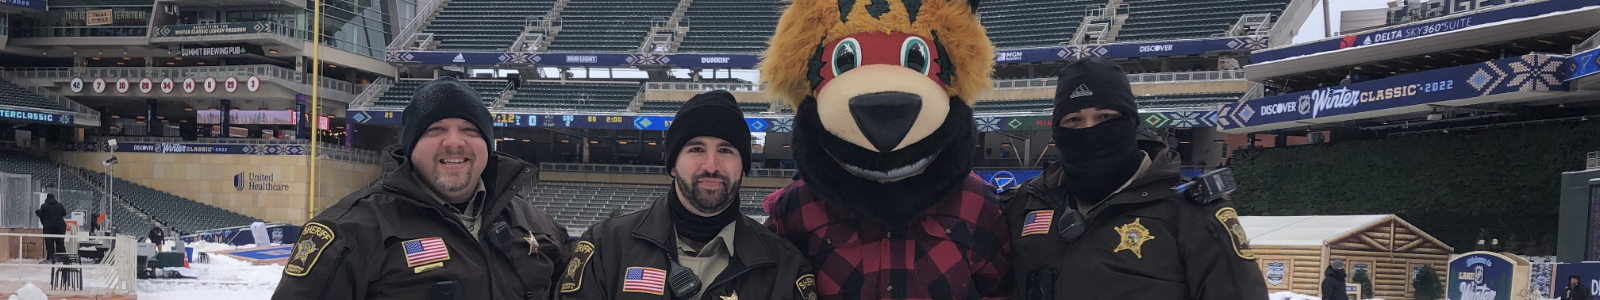 3 uniformed sheriff employees standing with Nordy the Minnesota Wild mascot